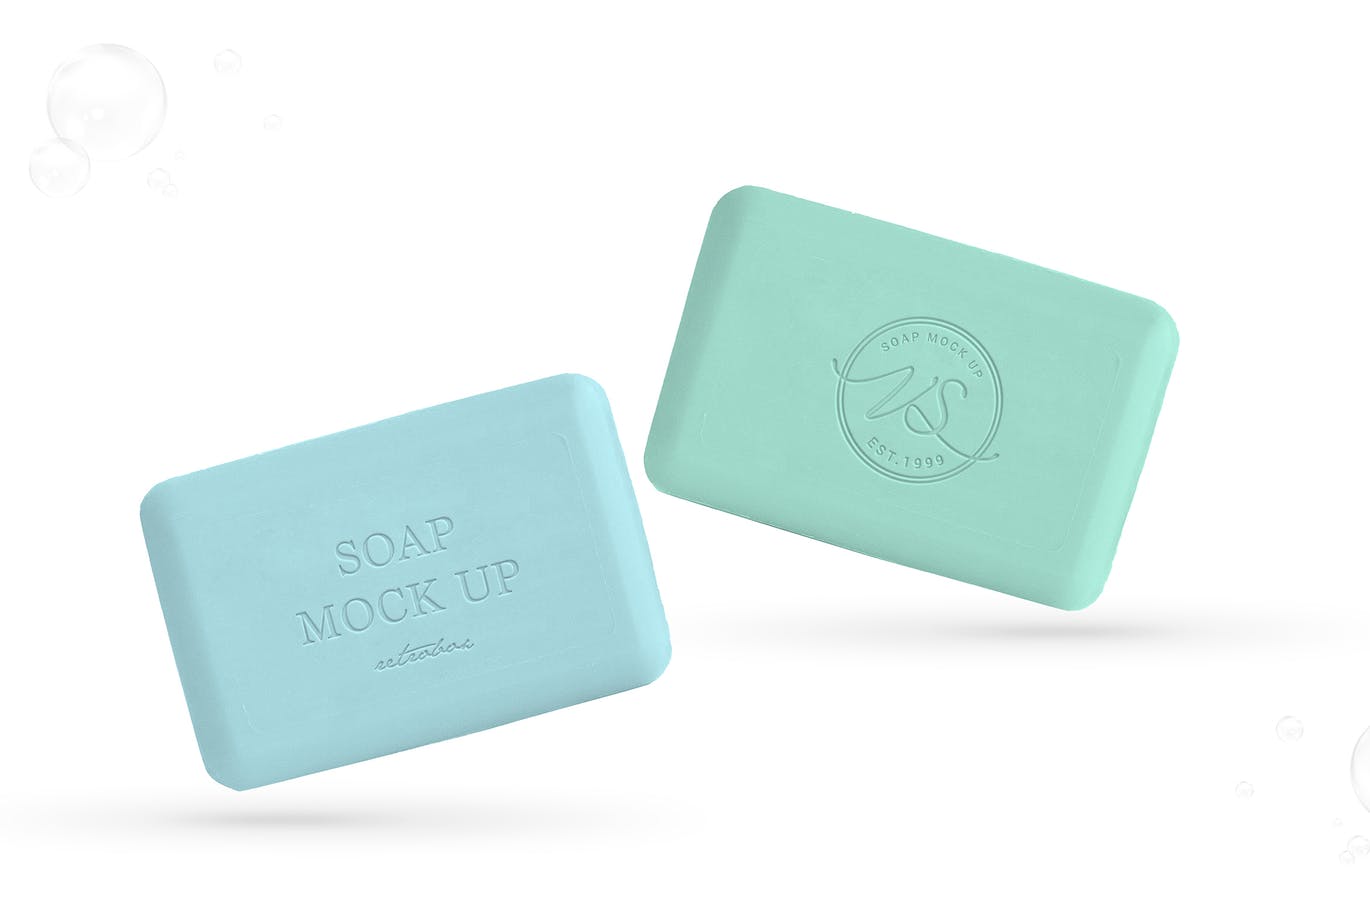 Download 35 Ultra Realistic Soap And Packaging Mockup Templates Decolore Net